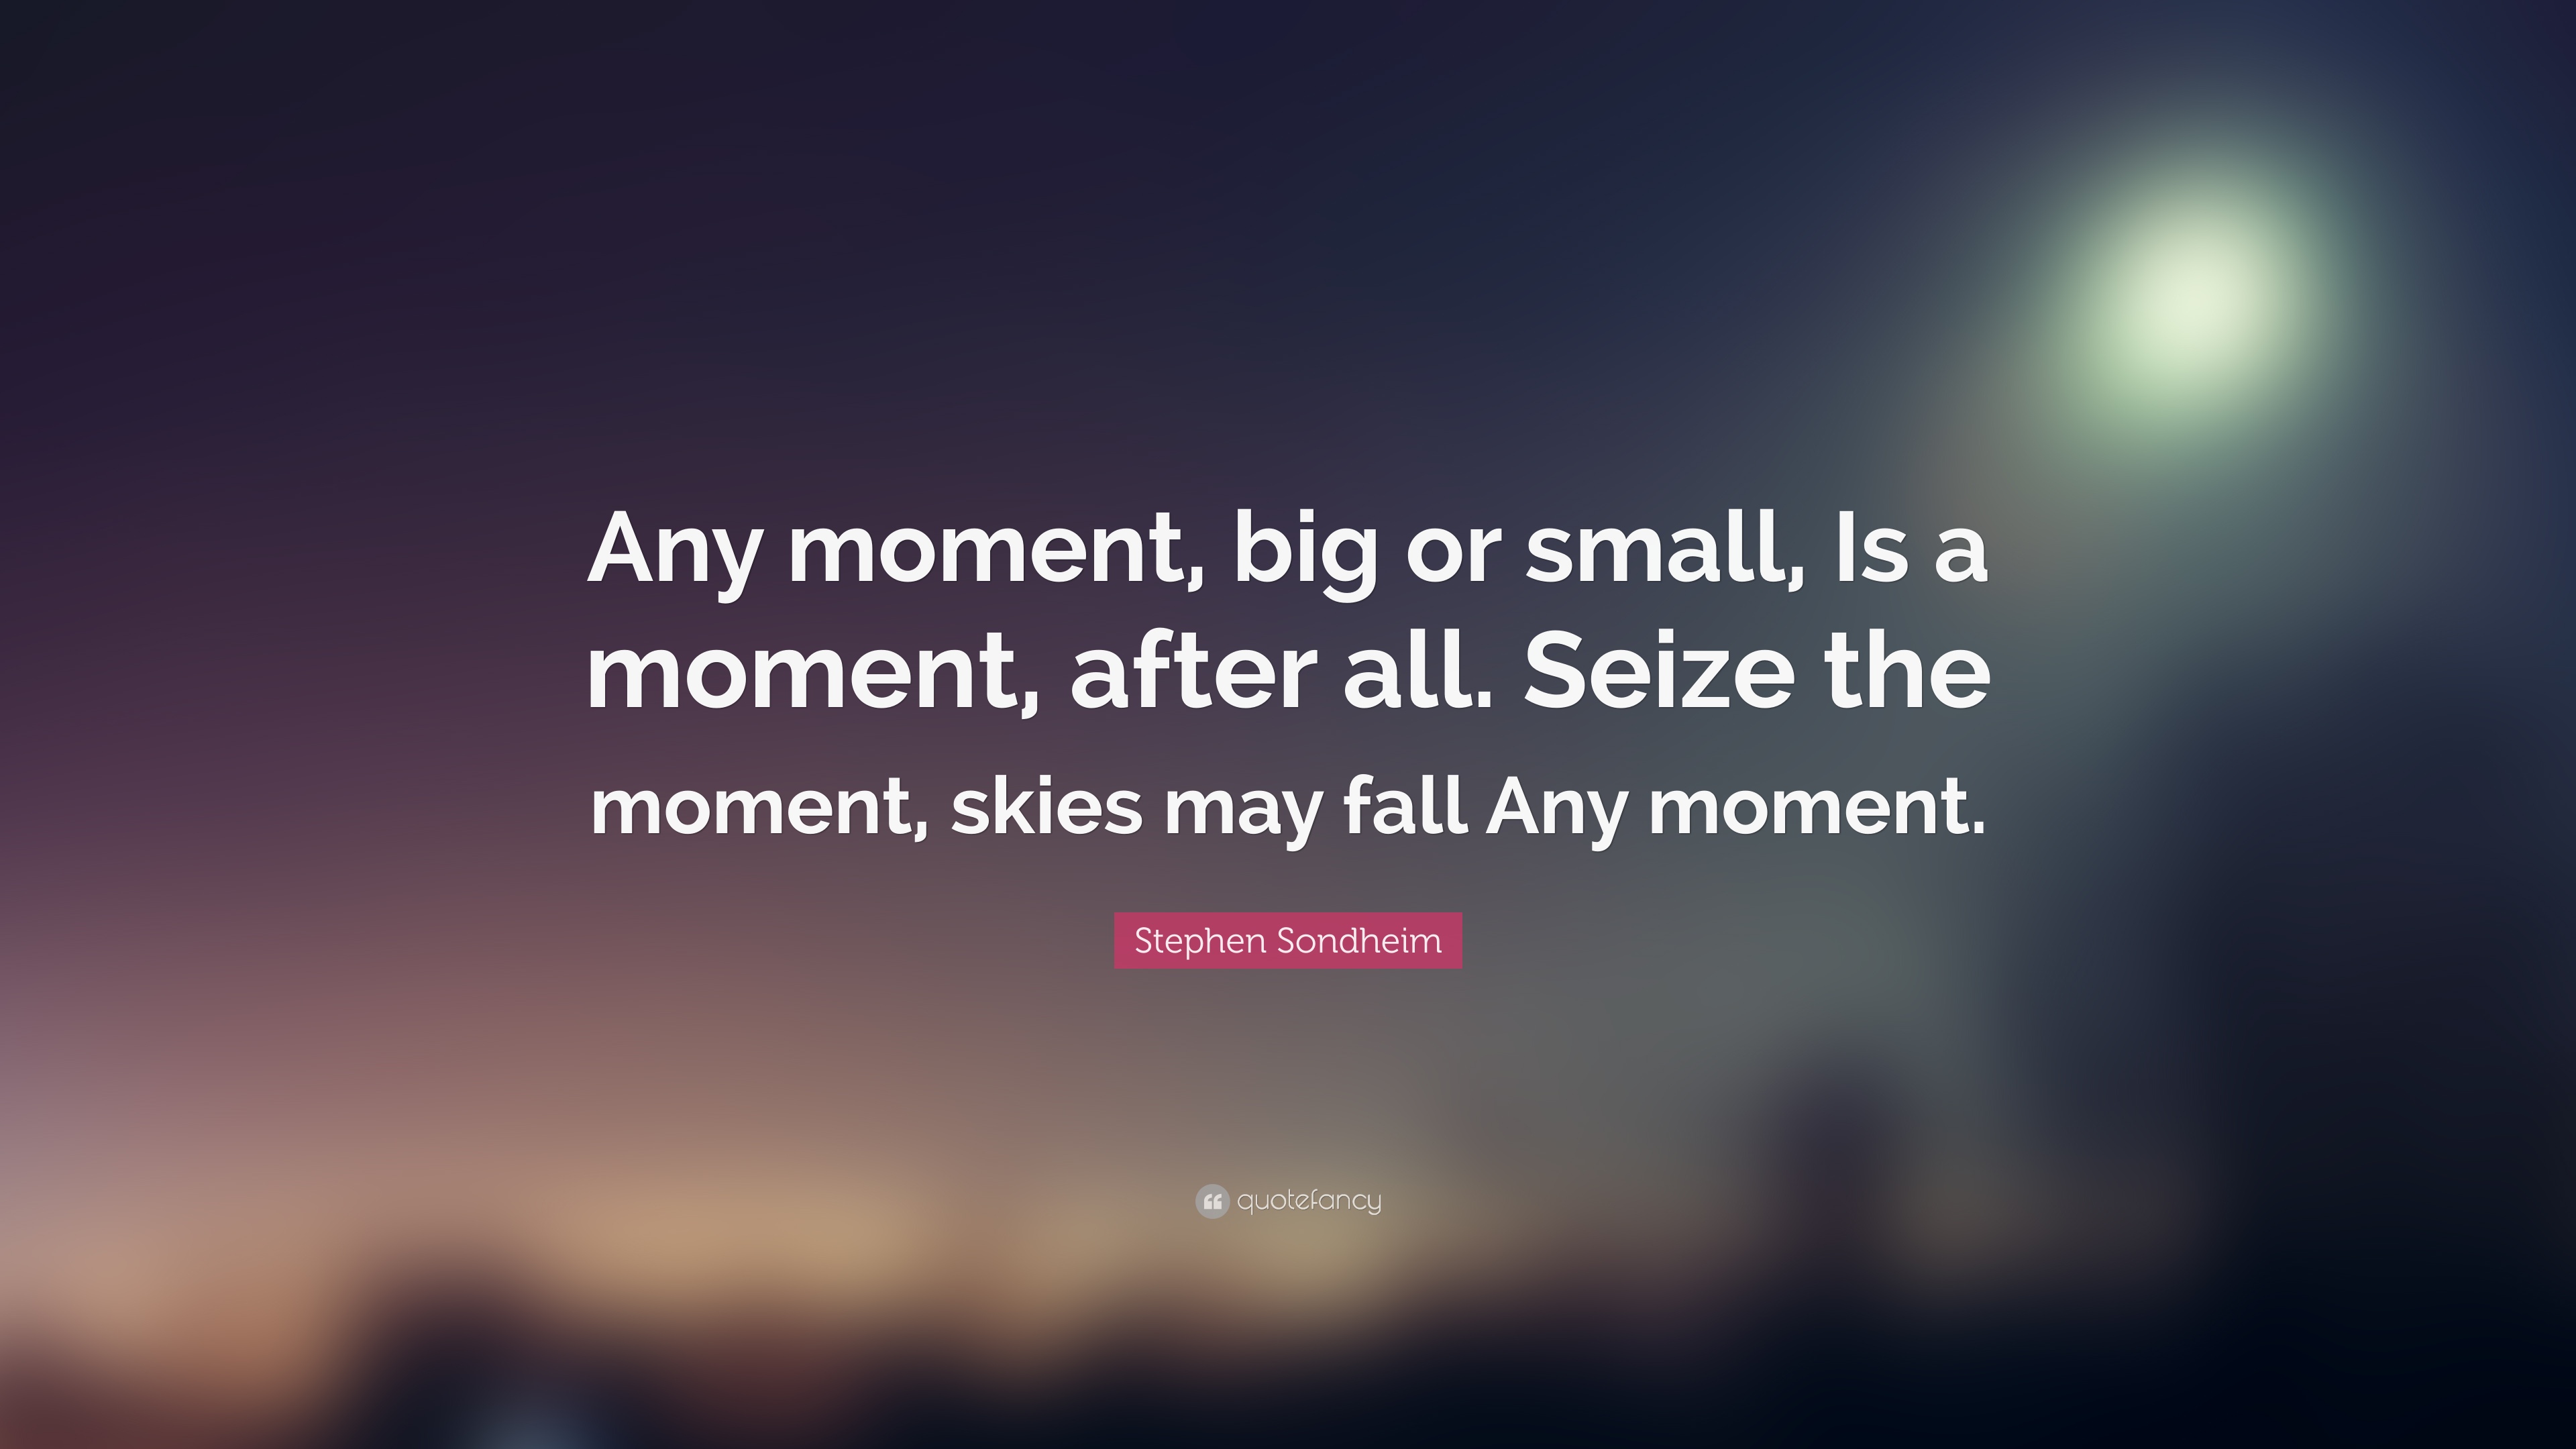 41 Best Seize The Moment Quotes